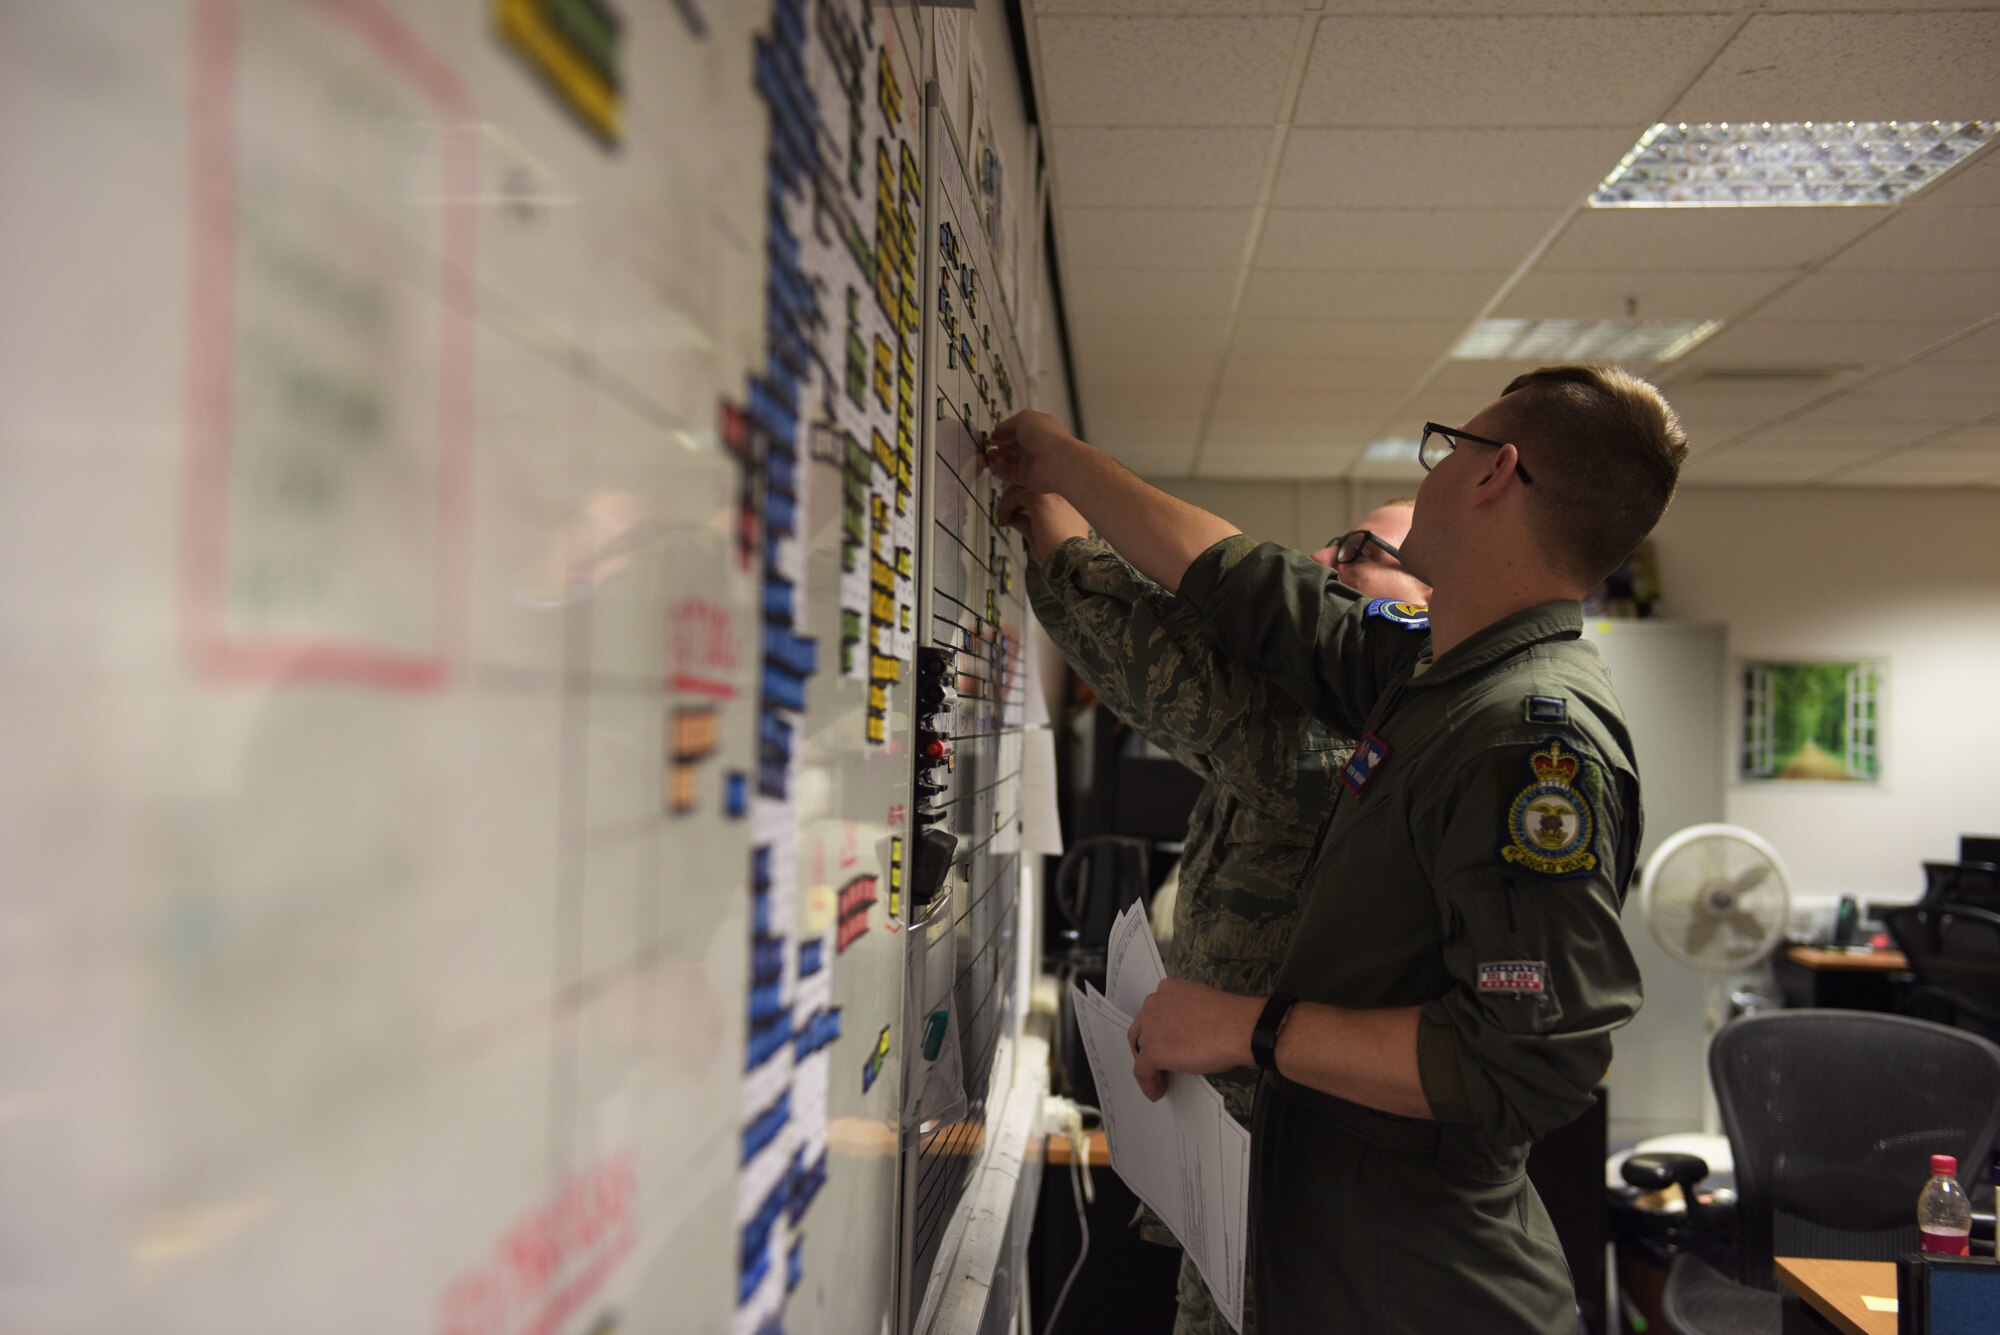 U.S. Air Force Capt. Kevin Brohaugh, 100th Operations Group assistant chief of scheduling, and Staff Sgt. Christopher Shelton, 100th Operations Group NCO-in-charge of scheduling, prepare crew schedules for a readiness exercise at RAF Mildenhall, England, Feb. 26, 2018.  The exercise tested the wing’s ability to rapidly mobilize an entire wing and prepare to launch KC-135s in response to an international incident. (U.S. Air Force photo by Airmen 1st Class Alexandria Lee)